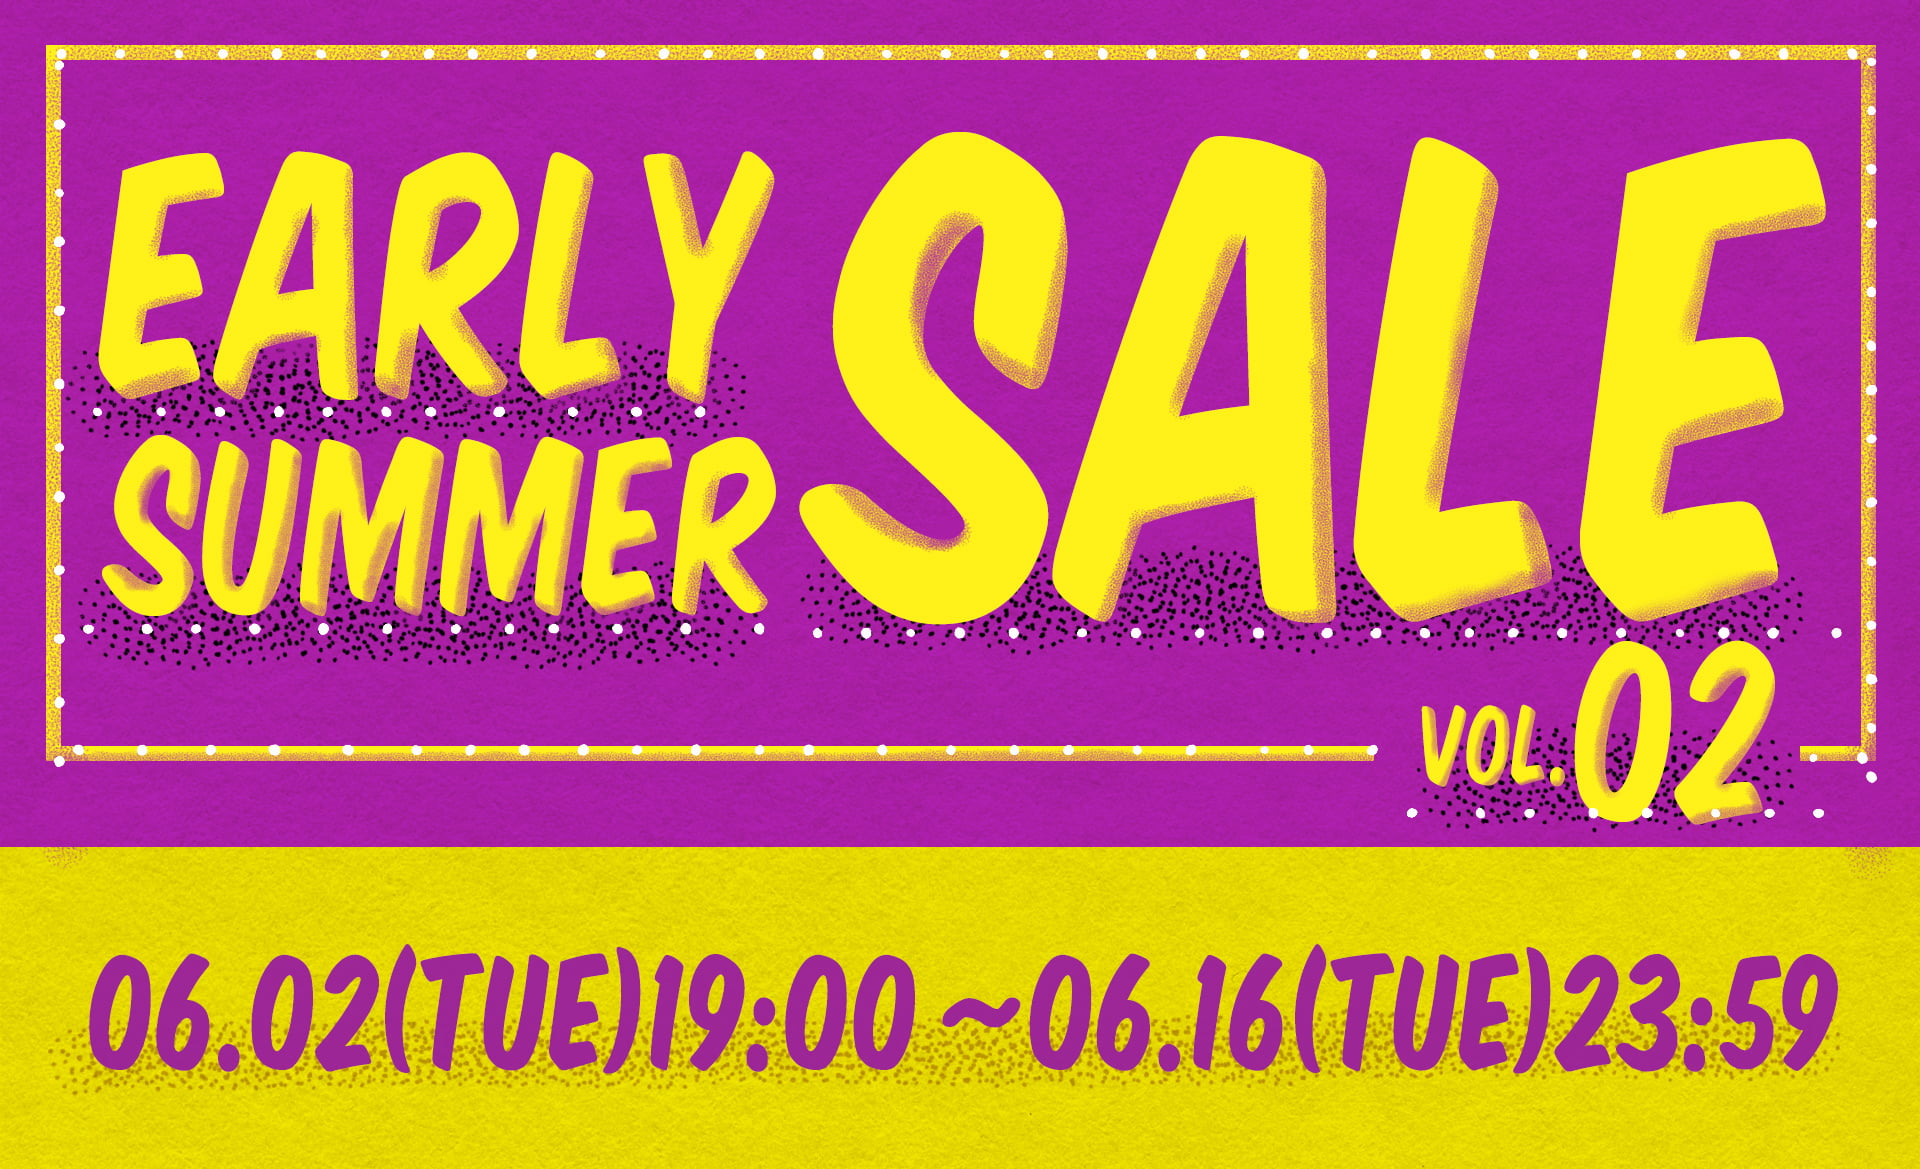 EARLY SUMMER TIME SALE - 6/2(TUE)19:00〜6/16(TUE)23:59